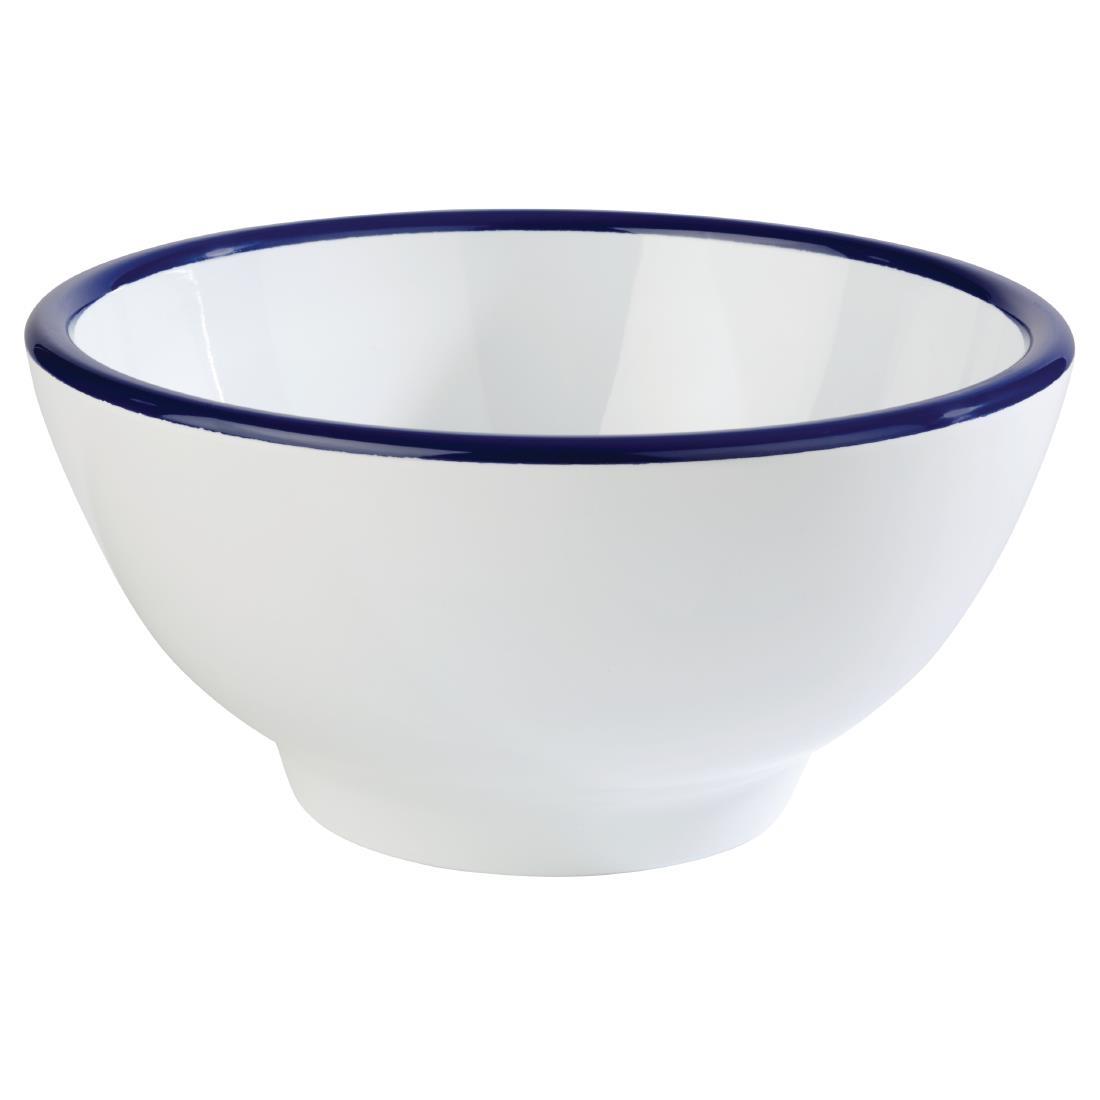 APS Pure Bowl White And Blue 150(D) x 75(H) 0.45Ltr (B2B) - FC985  - 1